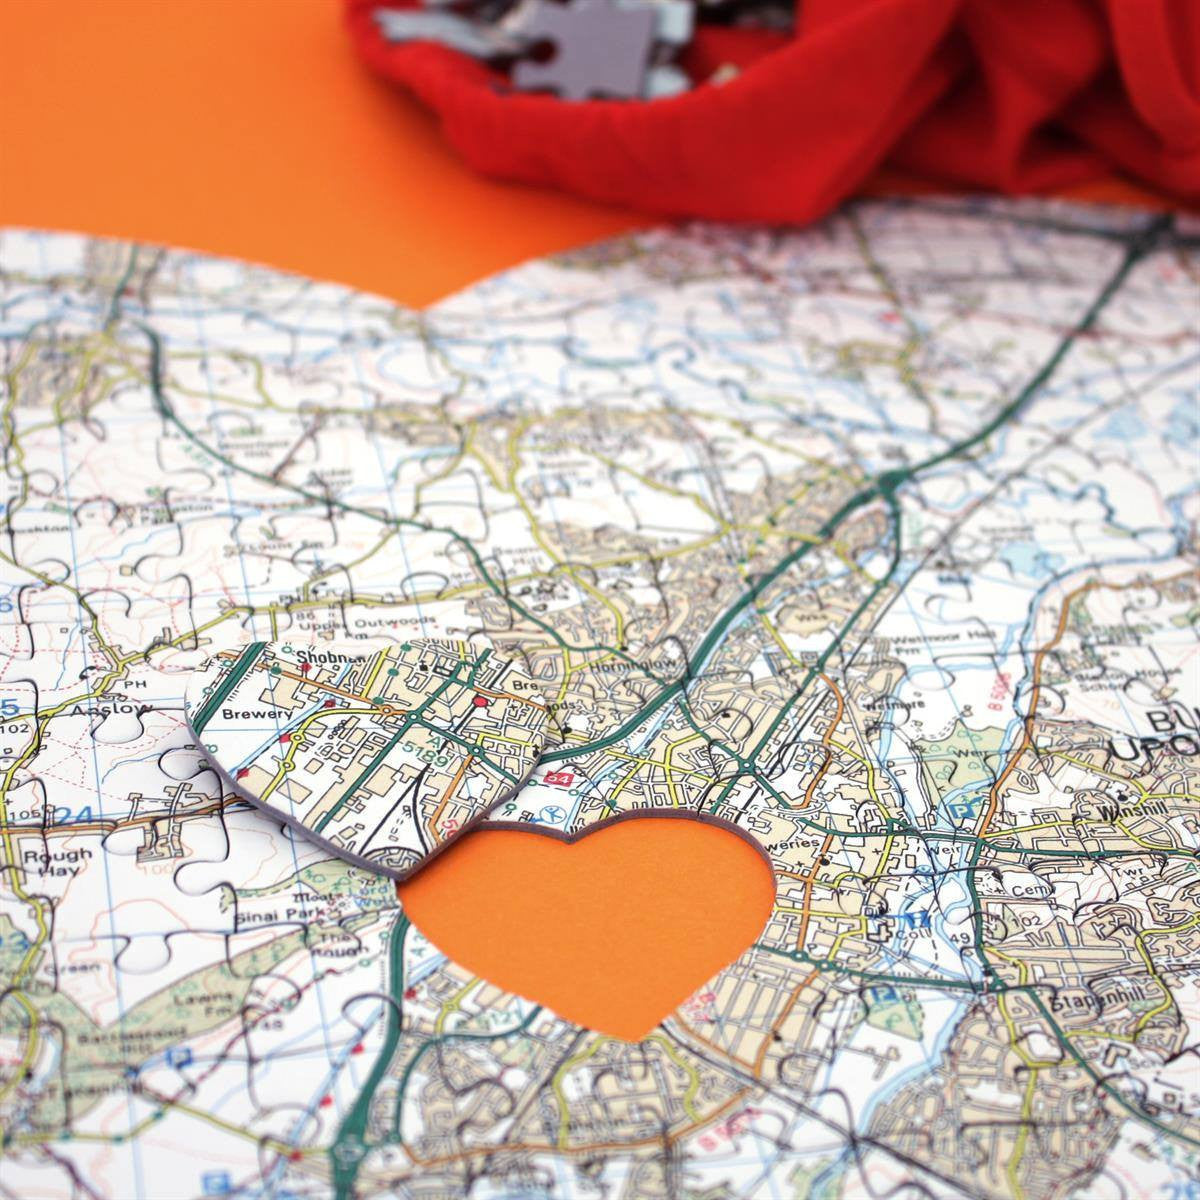 Jigsaw Puzzle - Personalised Heart-Shaped Map Jigsaw Puzzle